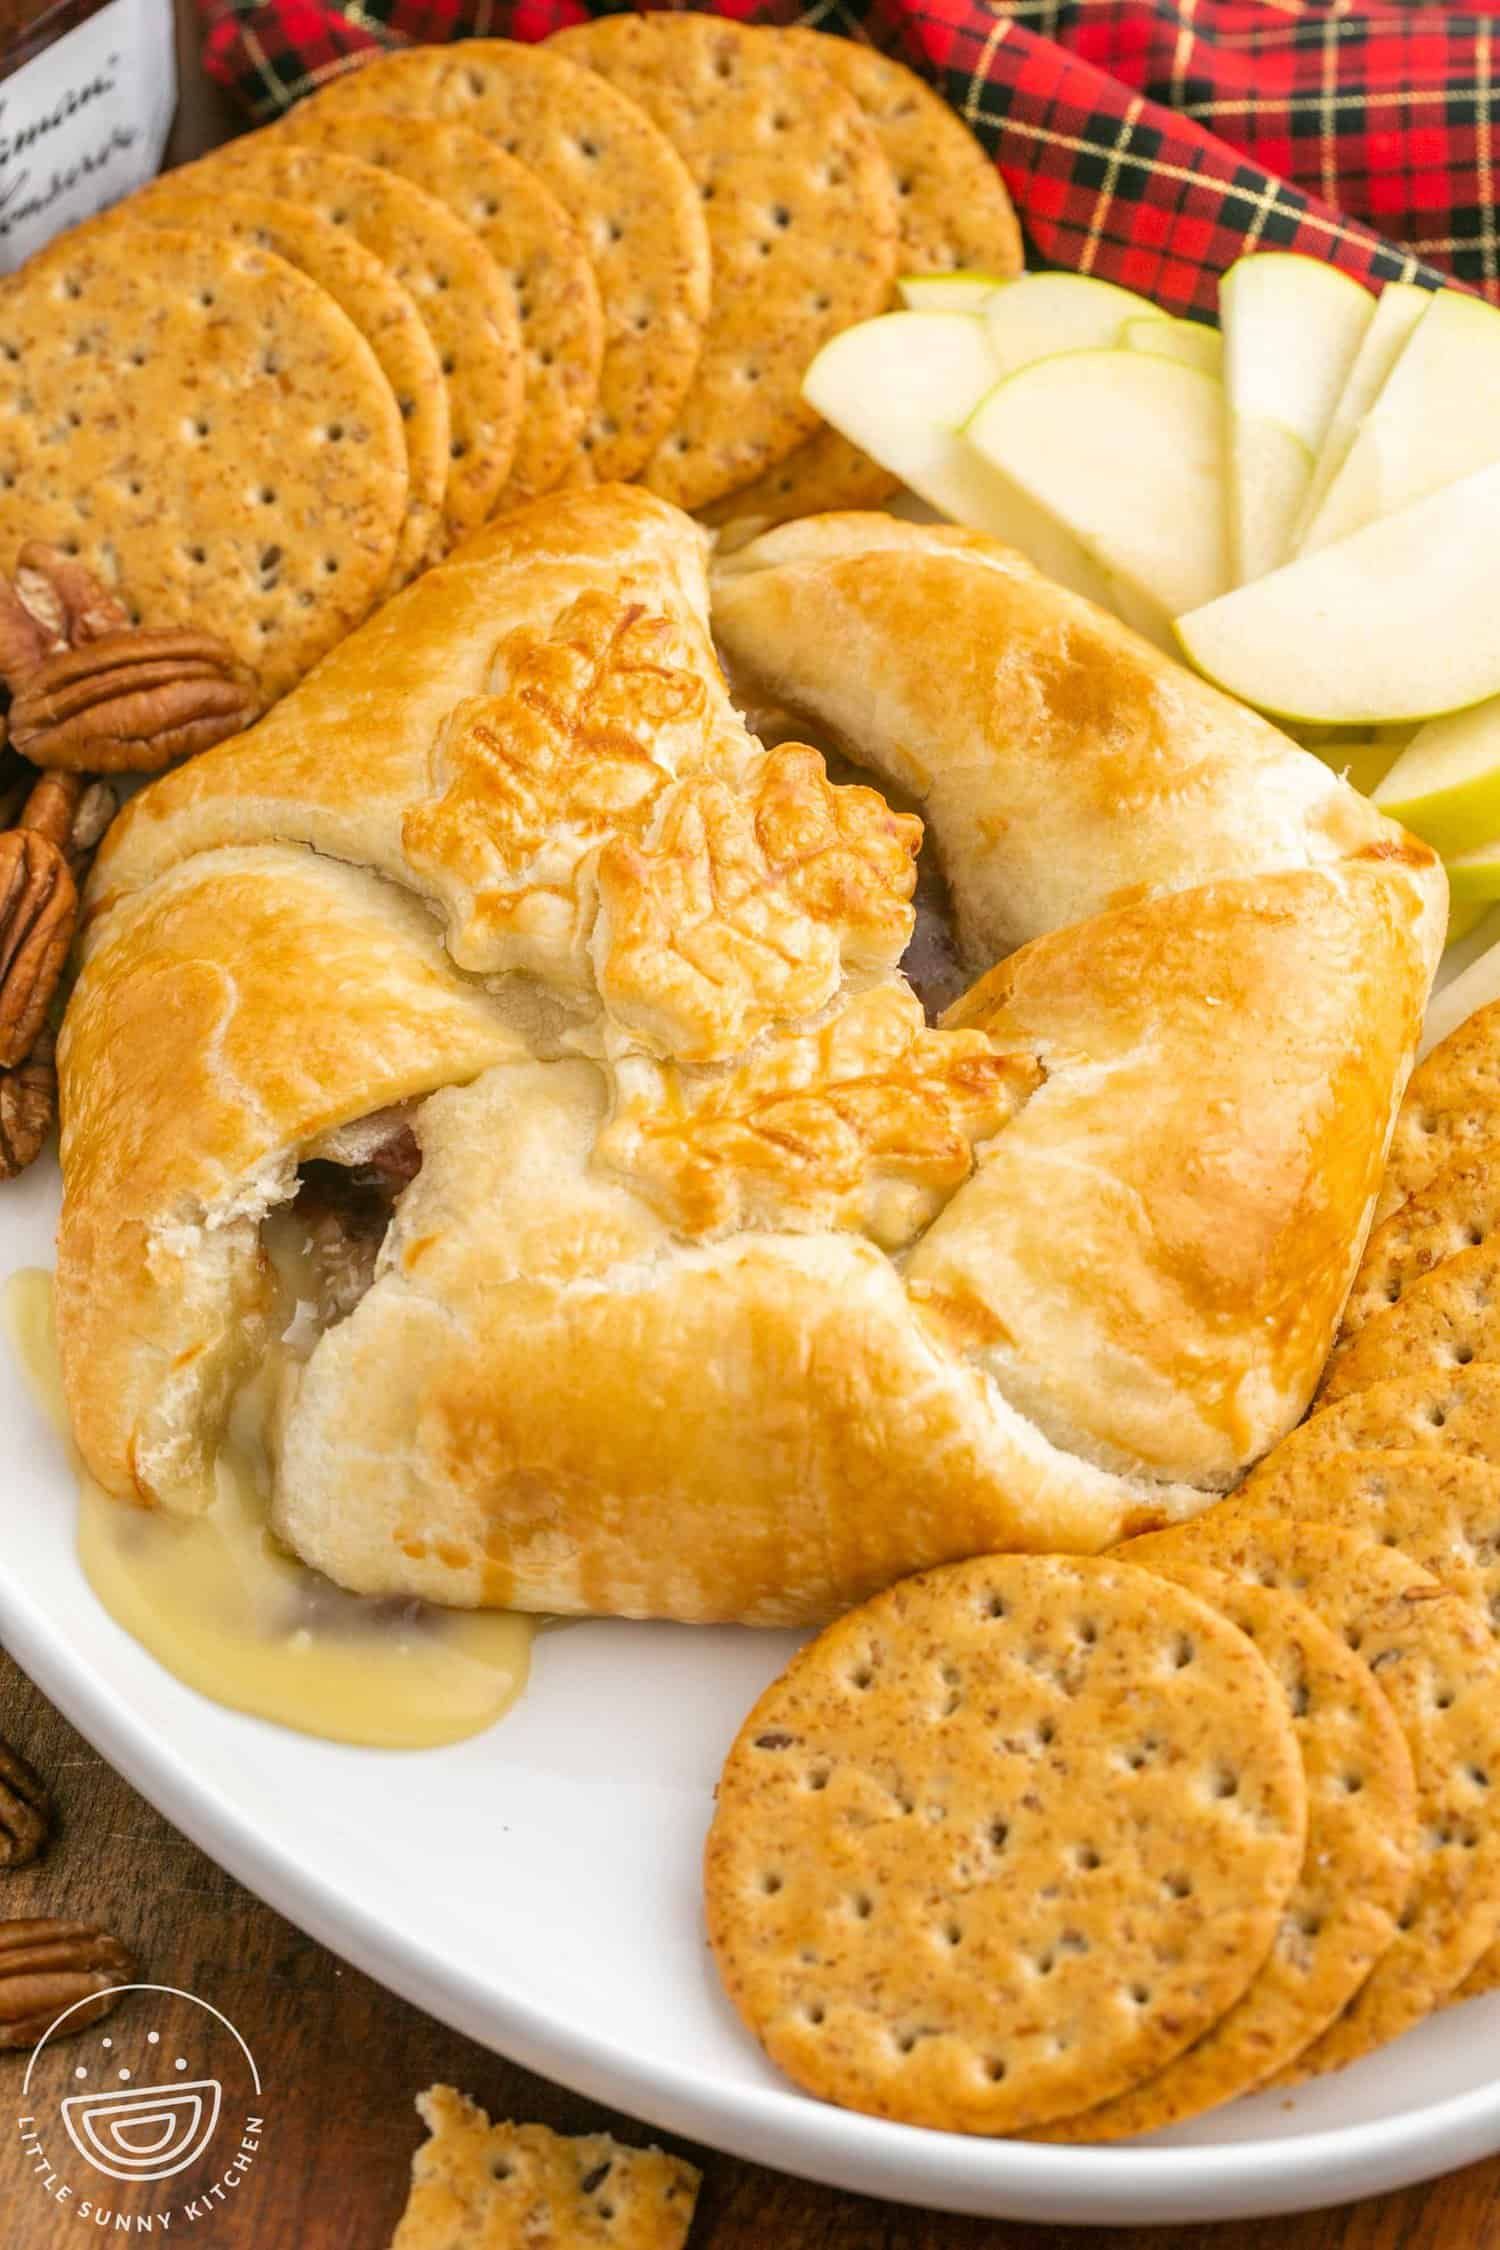 Baked brie in puff pastry served with crackers and thinly sliced apples